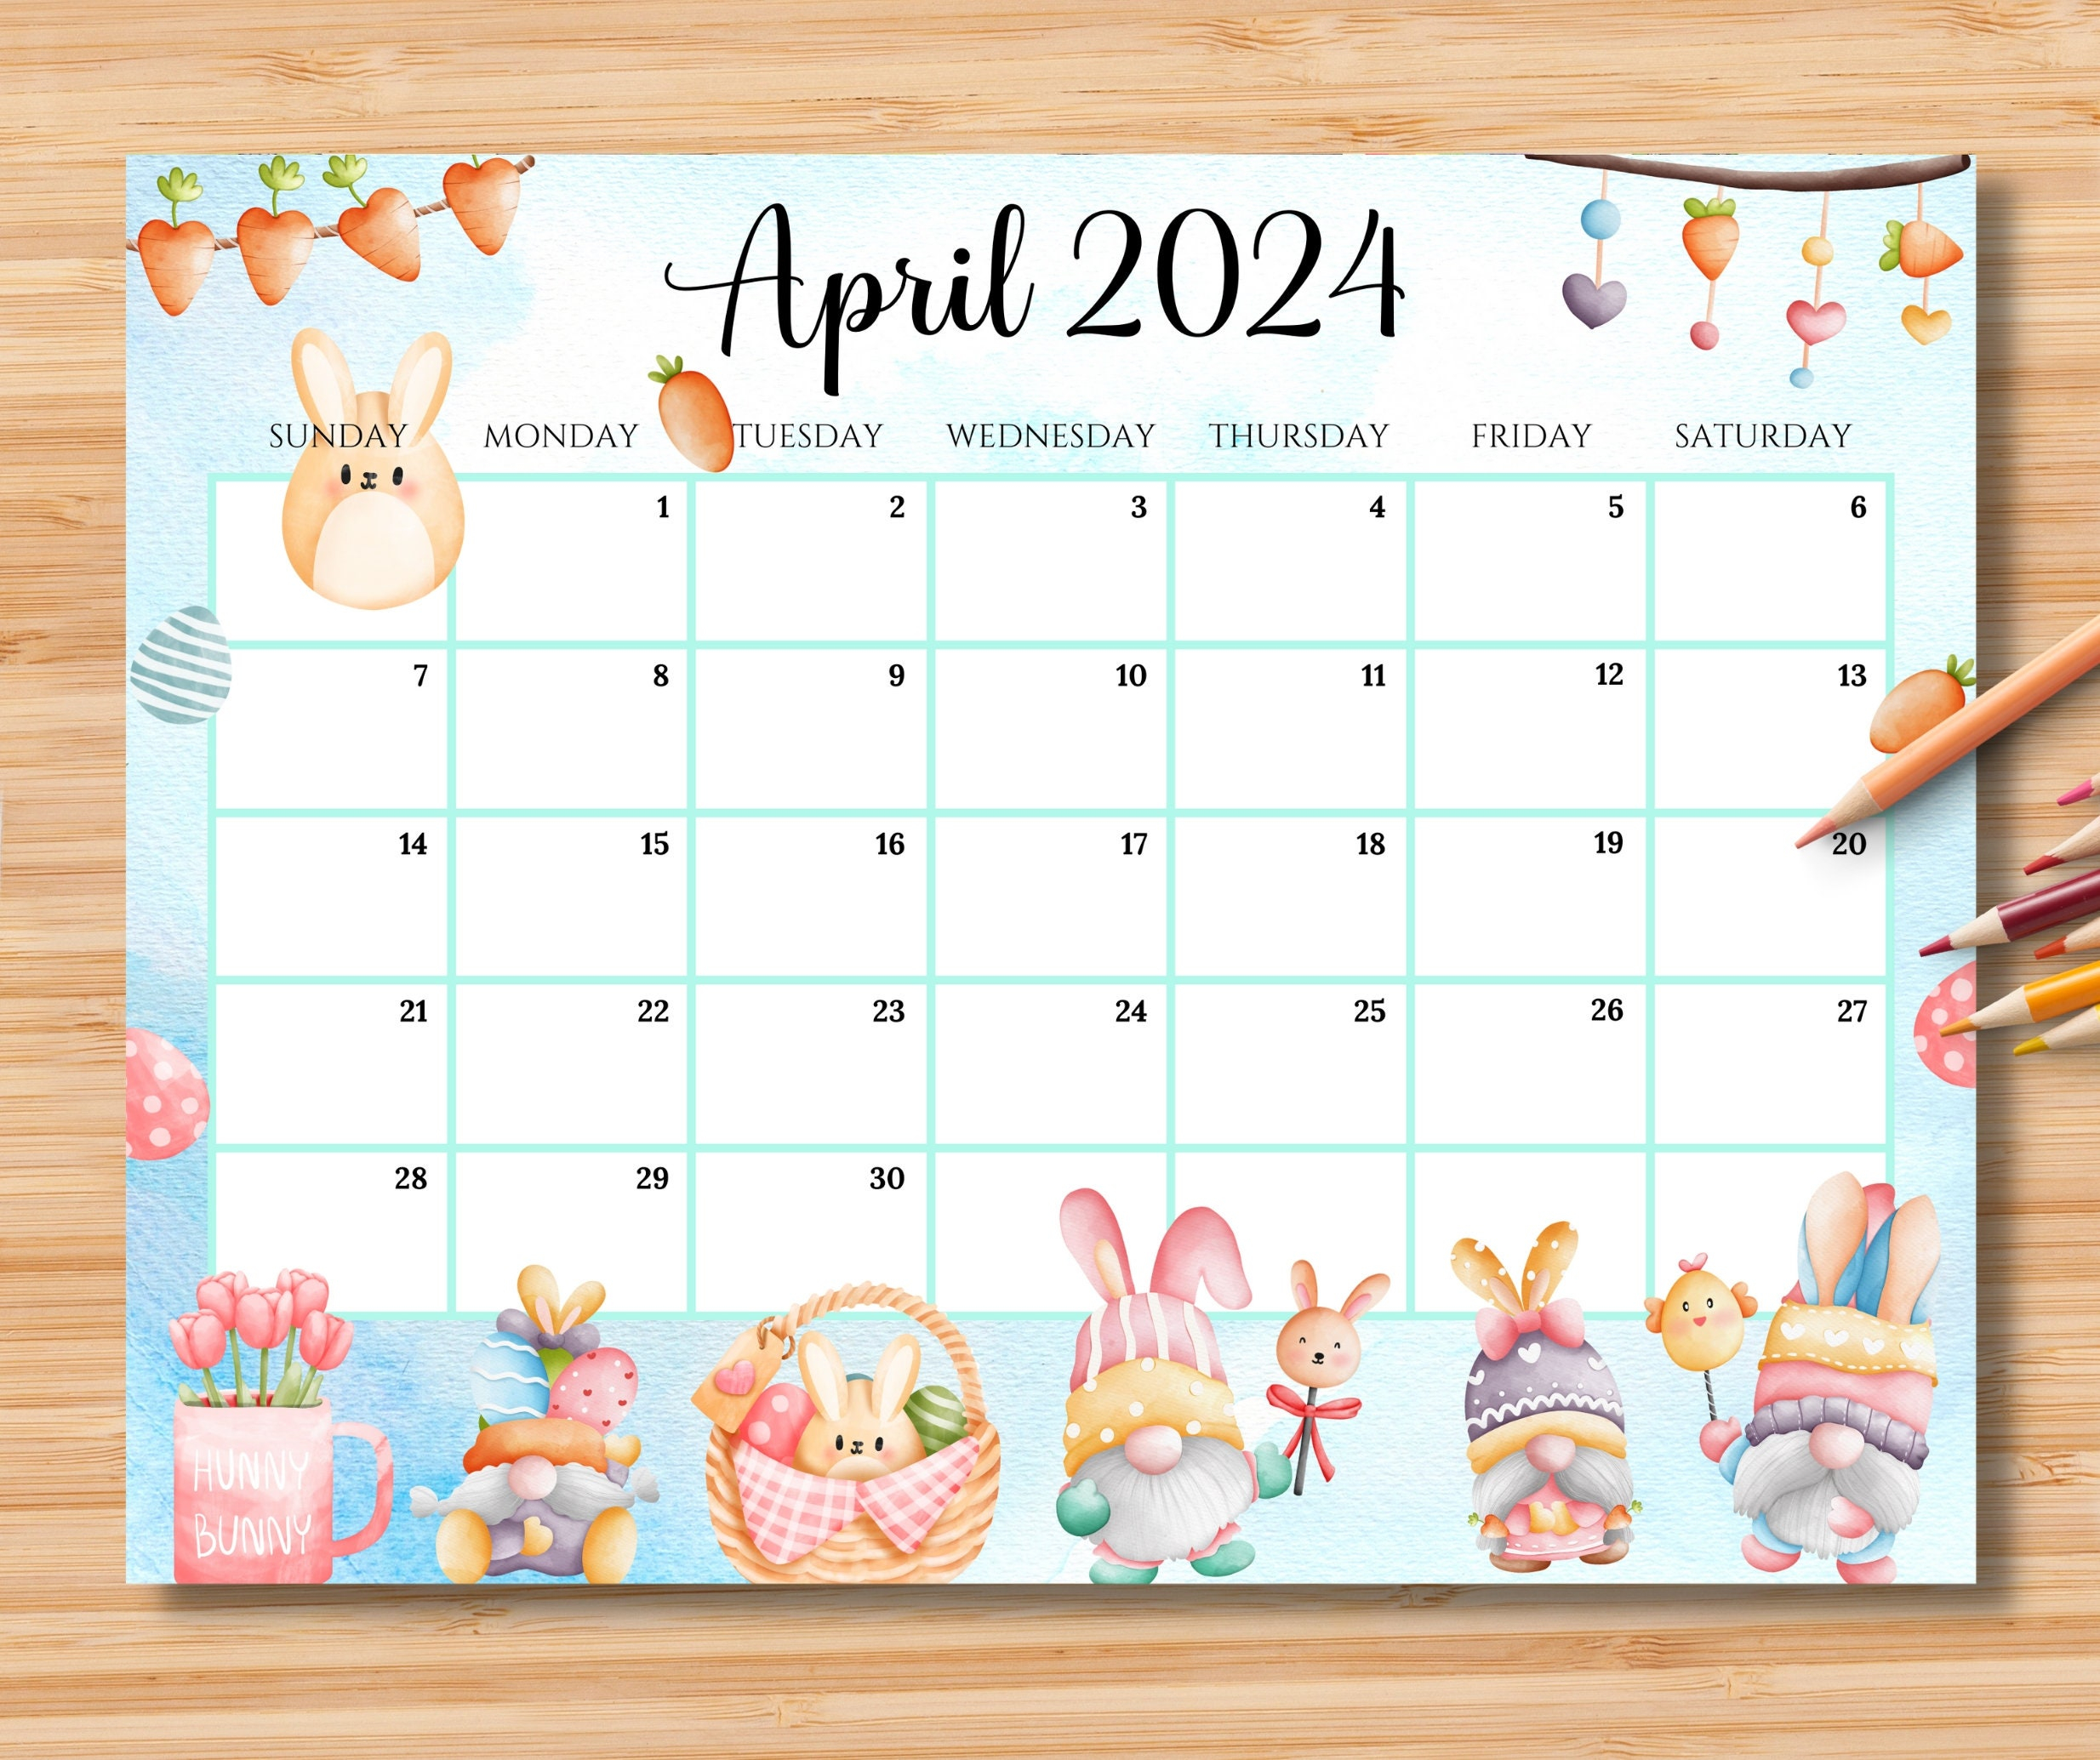 Editable April 2024 Calendar, Happy Easter Day With Cute Gnomes pertaining to April 2024 Editable Calendar